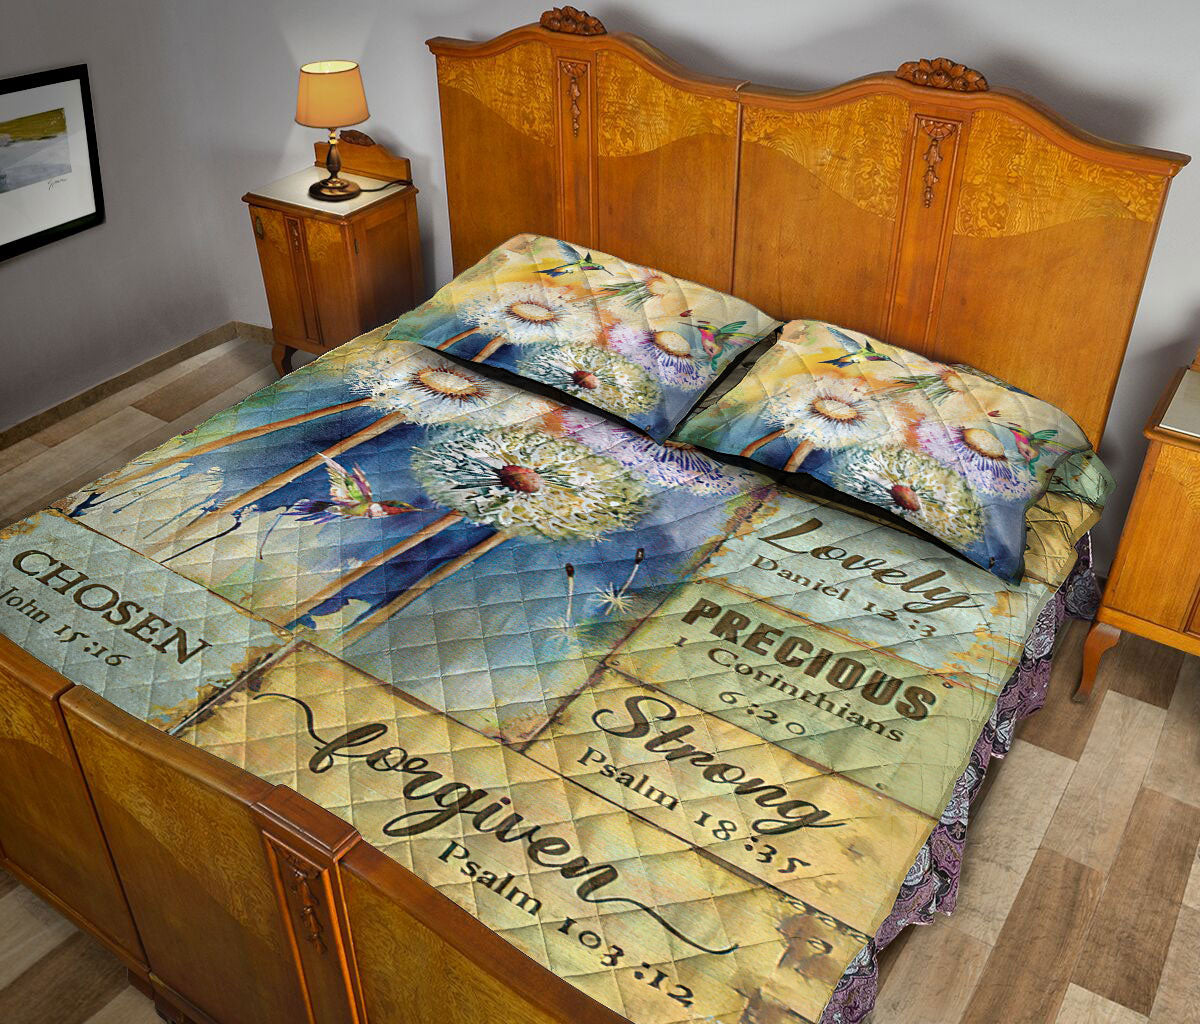 Ohaprints-Quilt-Bed-Set-Pillowcase-Hummingbird-Dandelion-Flower-God-Say-You-Are-Unique-Vintage-Yellow-Blanket-Bedspread-Bedding-2640-Queen (80'' x 90'')